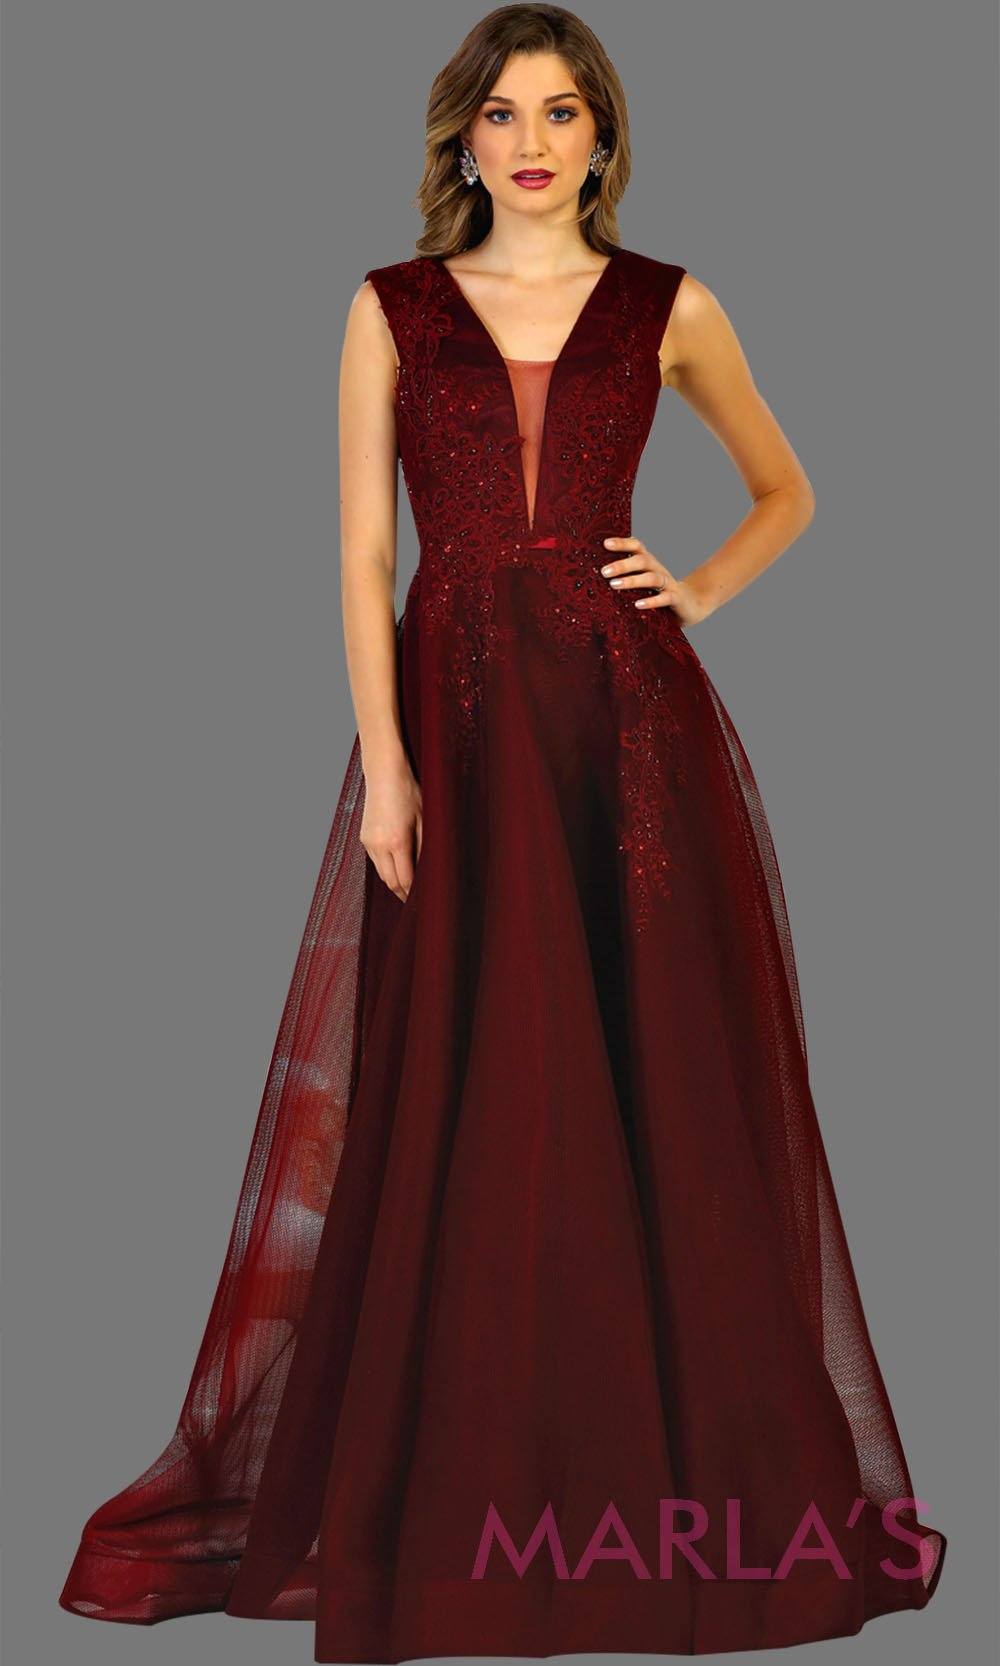 Long burgundy v neck ball gown dress with plunging neckline. Dark red dress is perfect for formal wedding, gala, wedding guest dress, quinceanera, sweet 16, wedding reception dress, engagement dress.Plus size avail